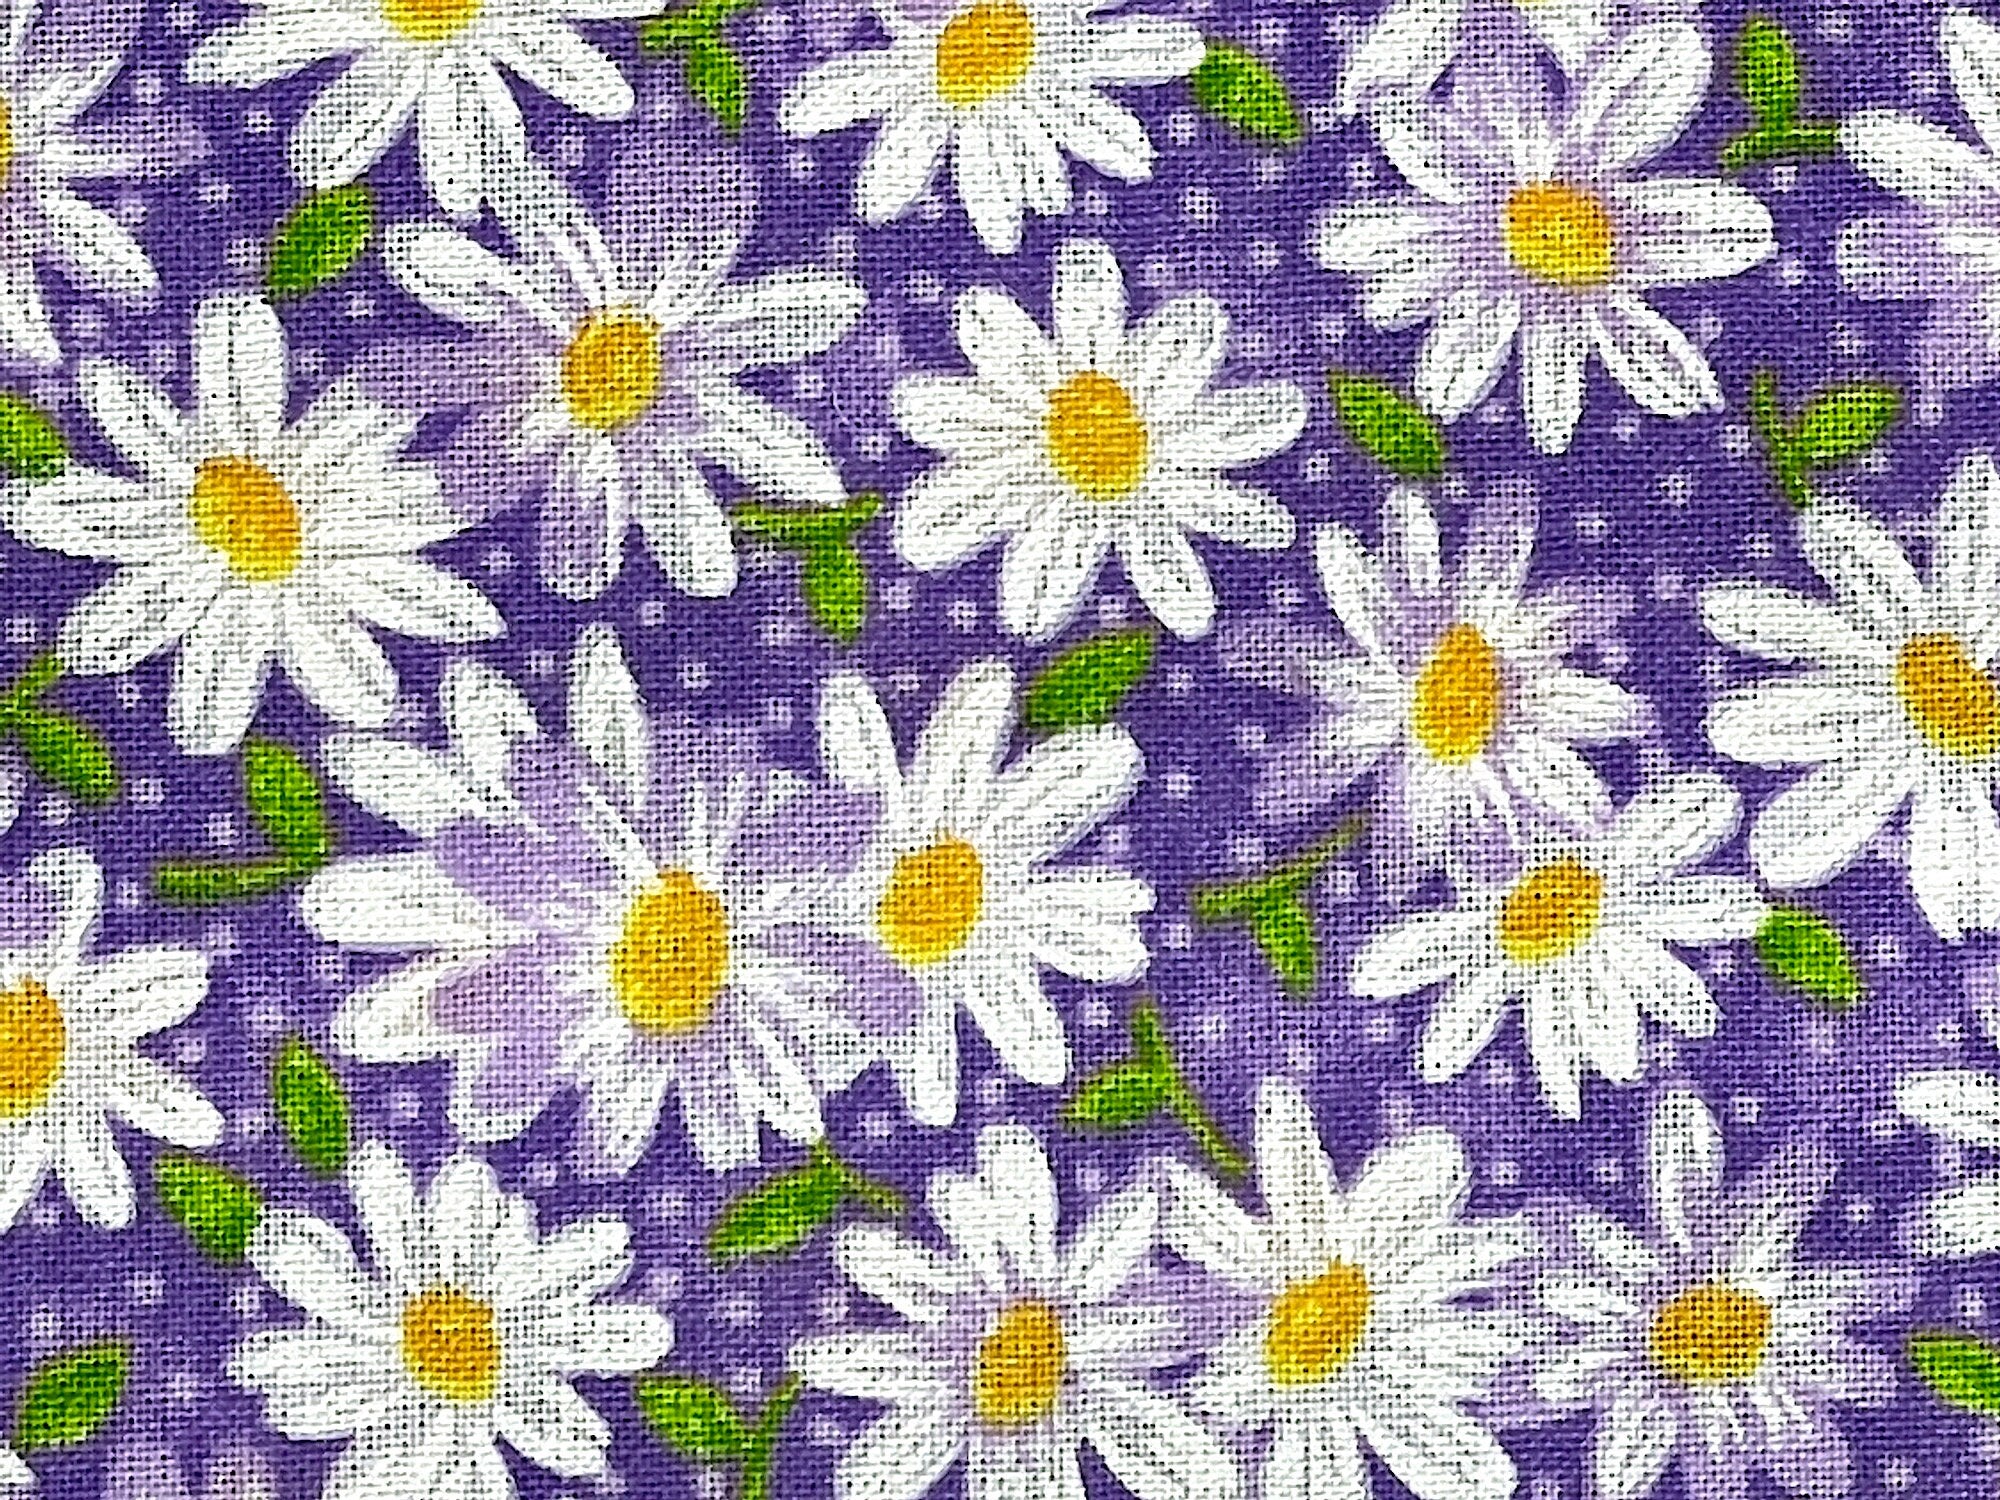 White Daisies with yellow centers on a purple background